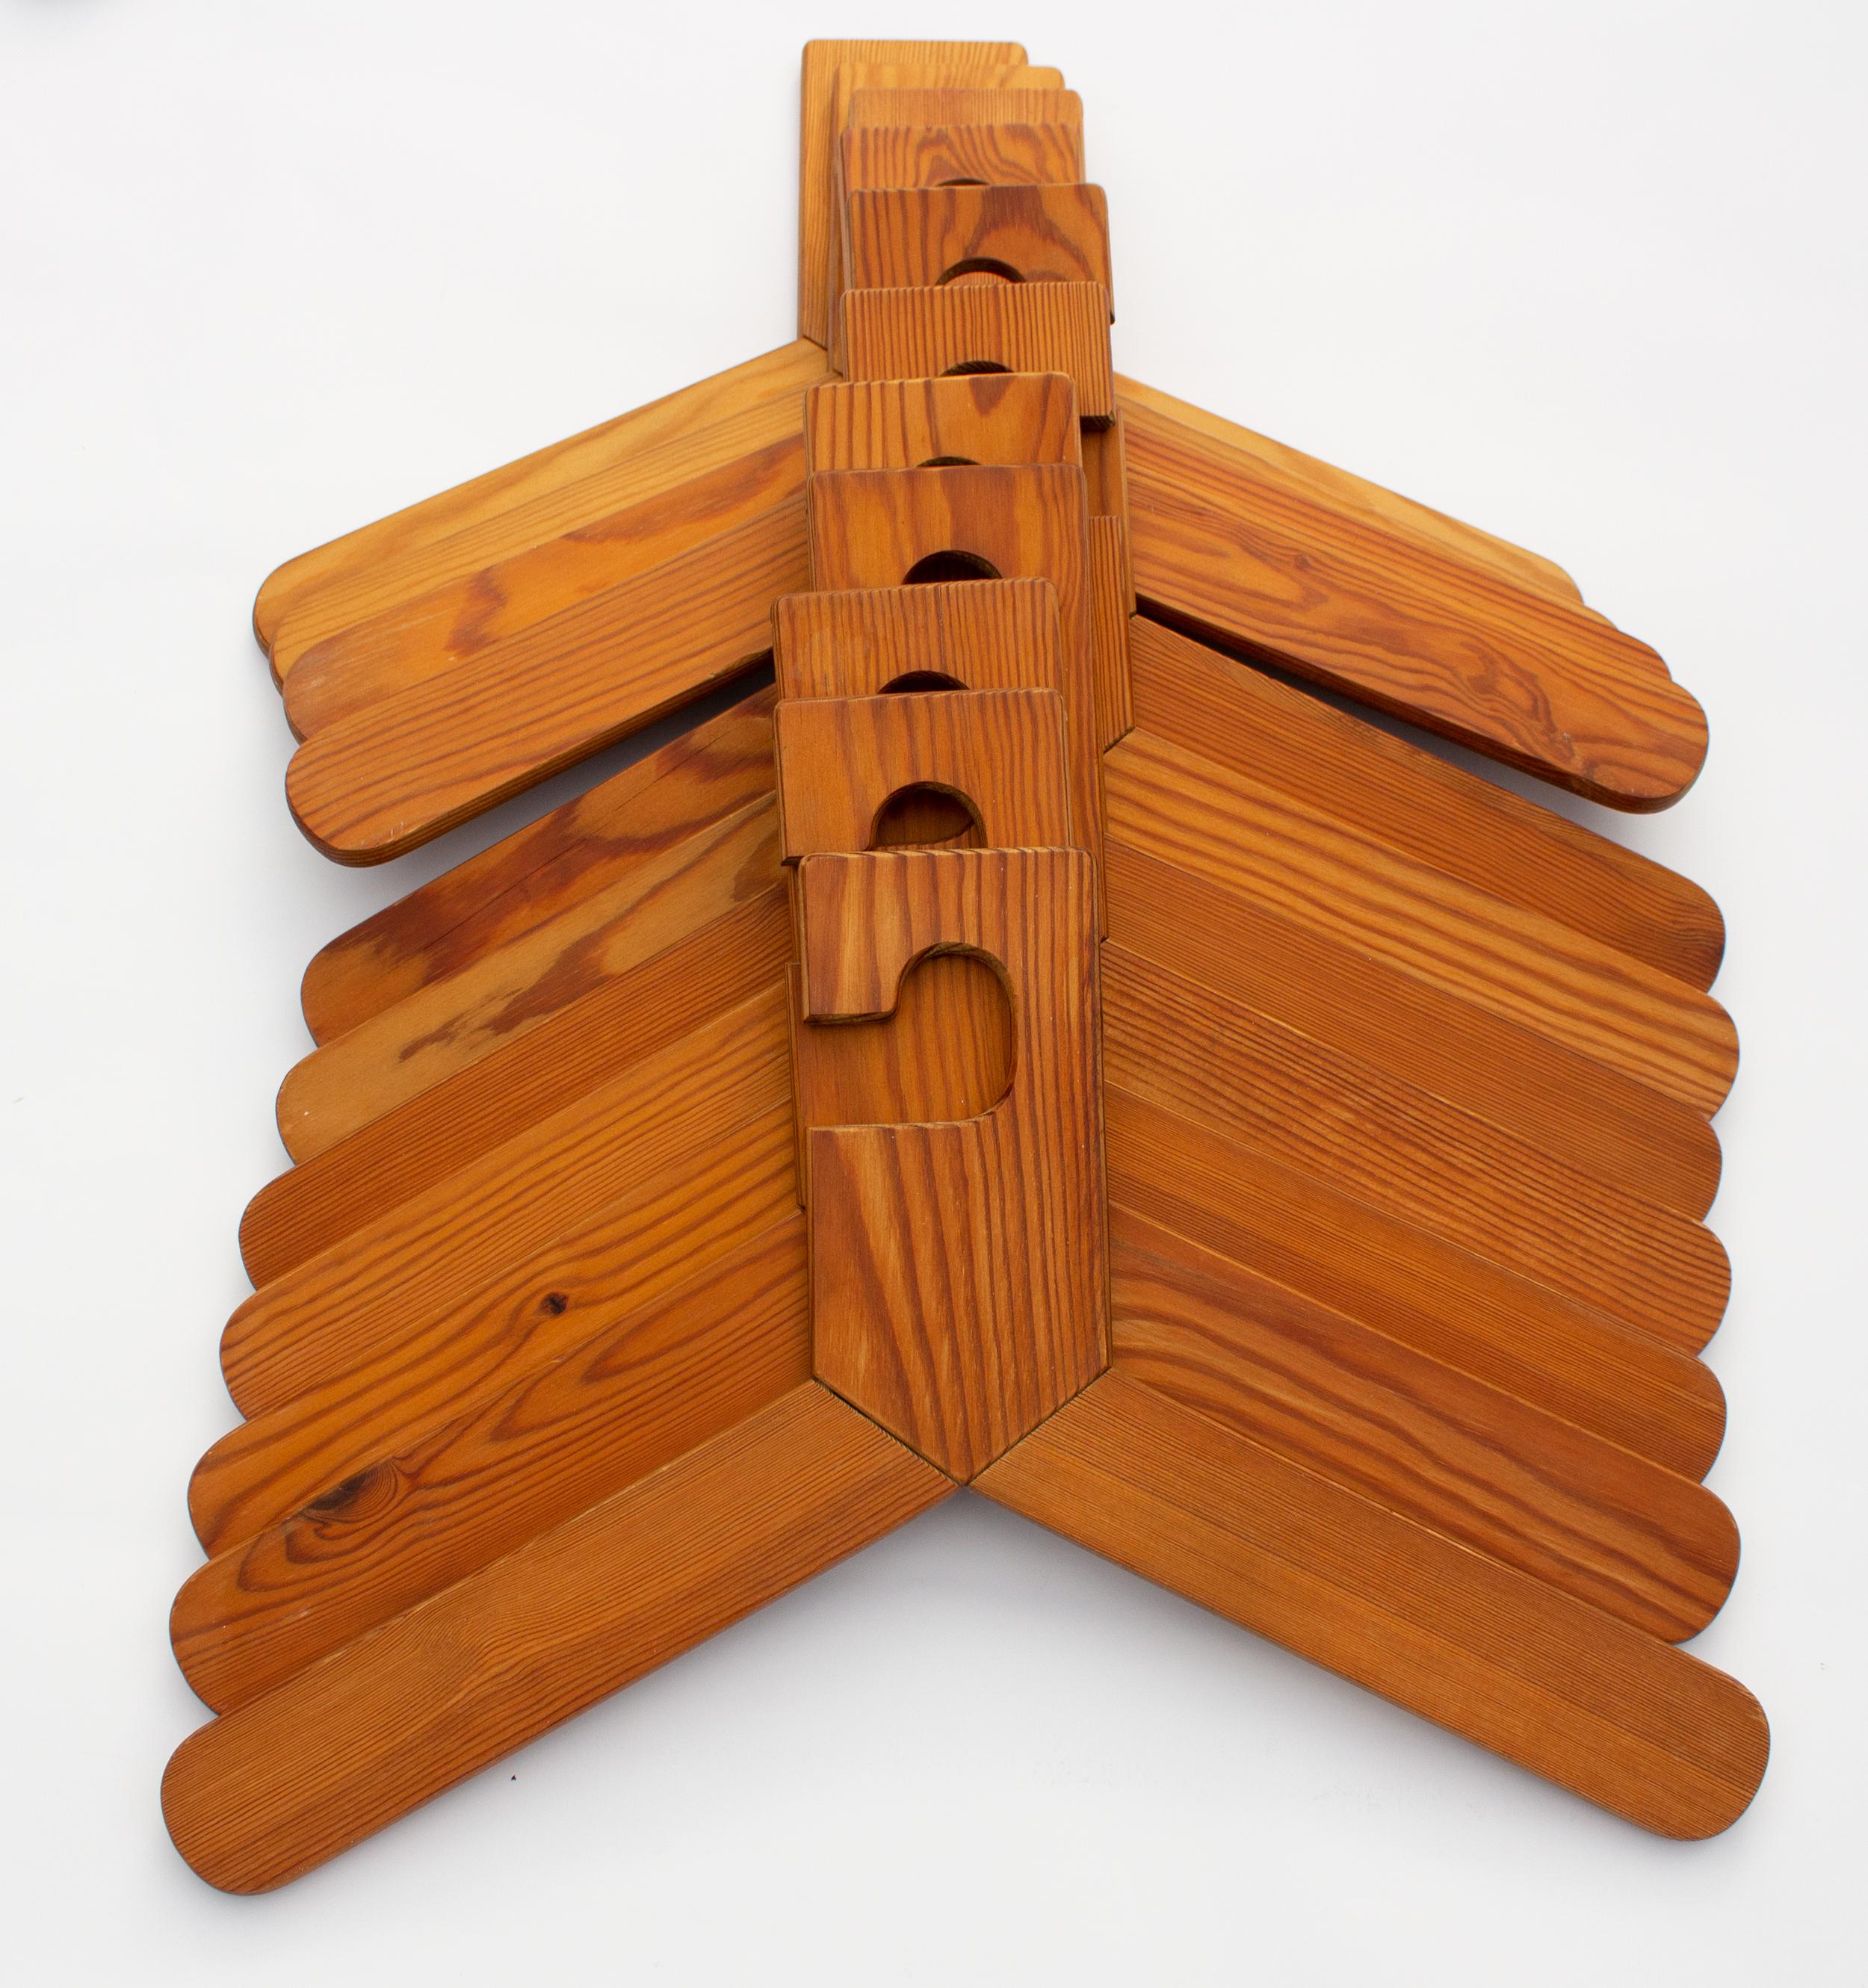 Scandinavian Modern hangers in wood from Sweden, made out of Fir. Surprise yourself with stylish handmade hangers in your wardrobe in the style of Axel Einar Hjort.